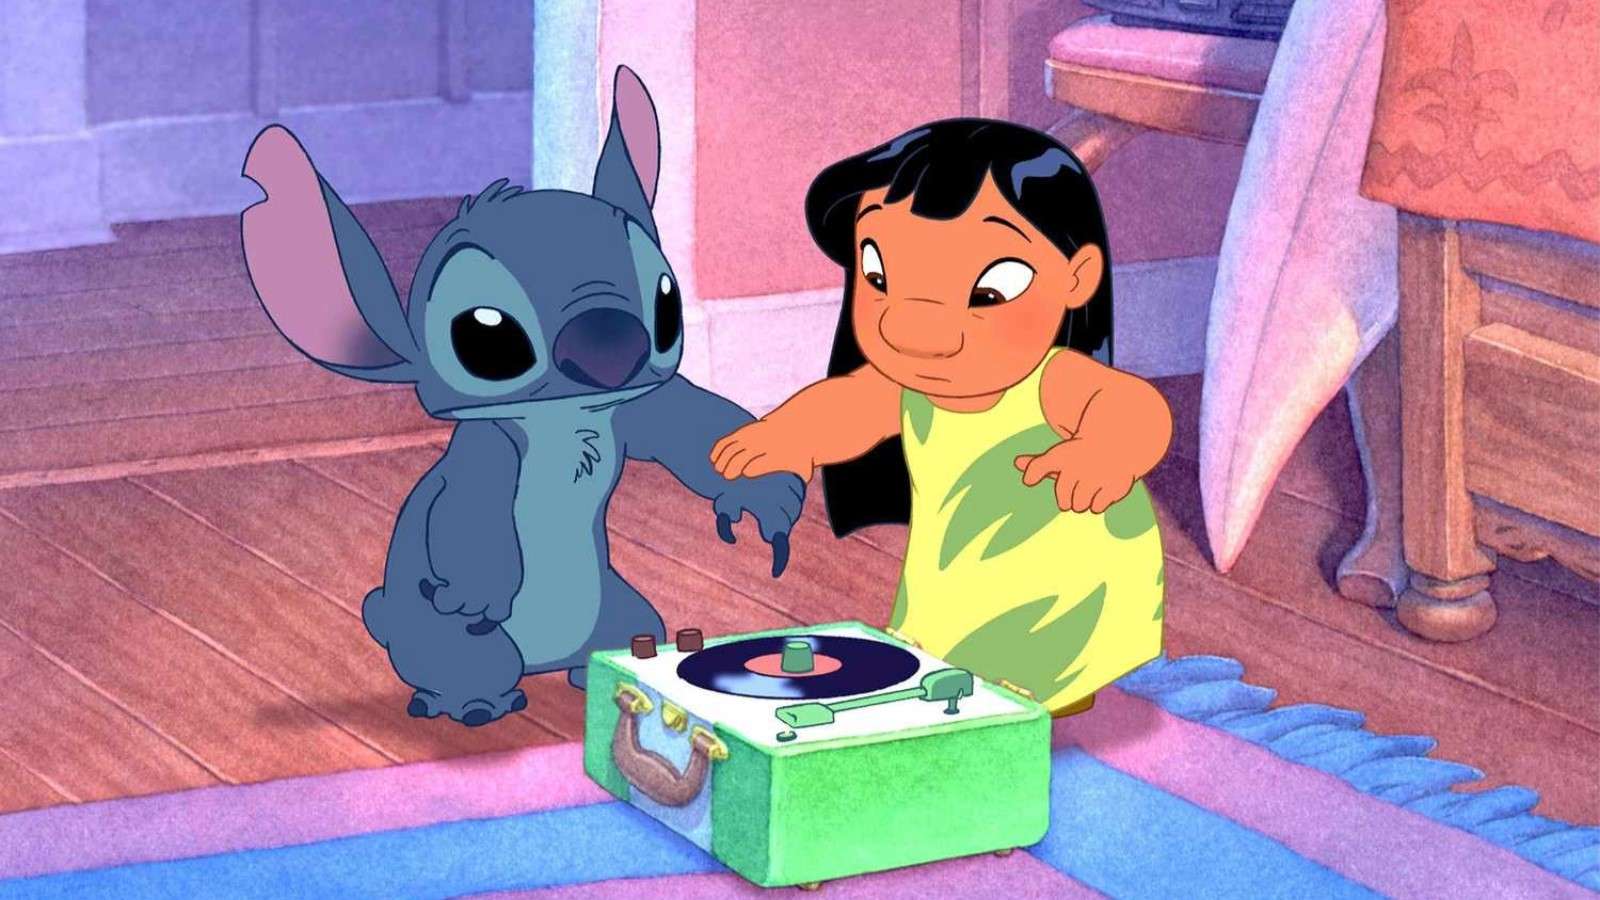 EXCLUSIVE: Live-Action 'Lilo & Stitch' Replacing an Iconic